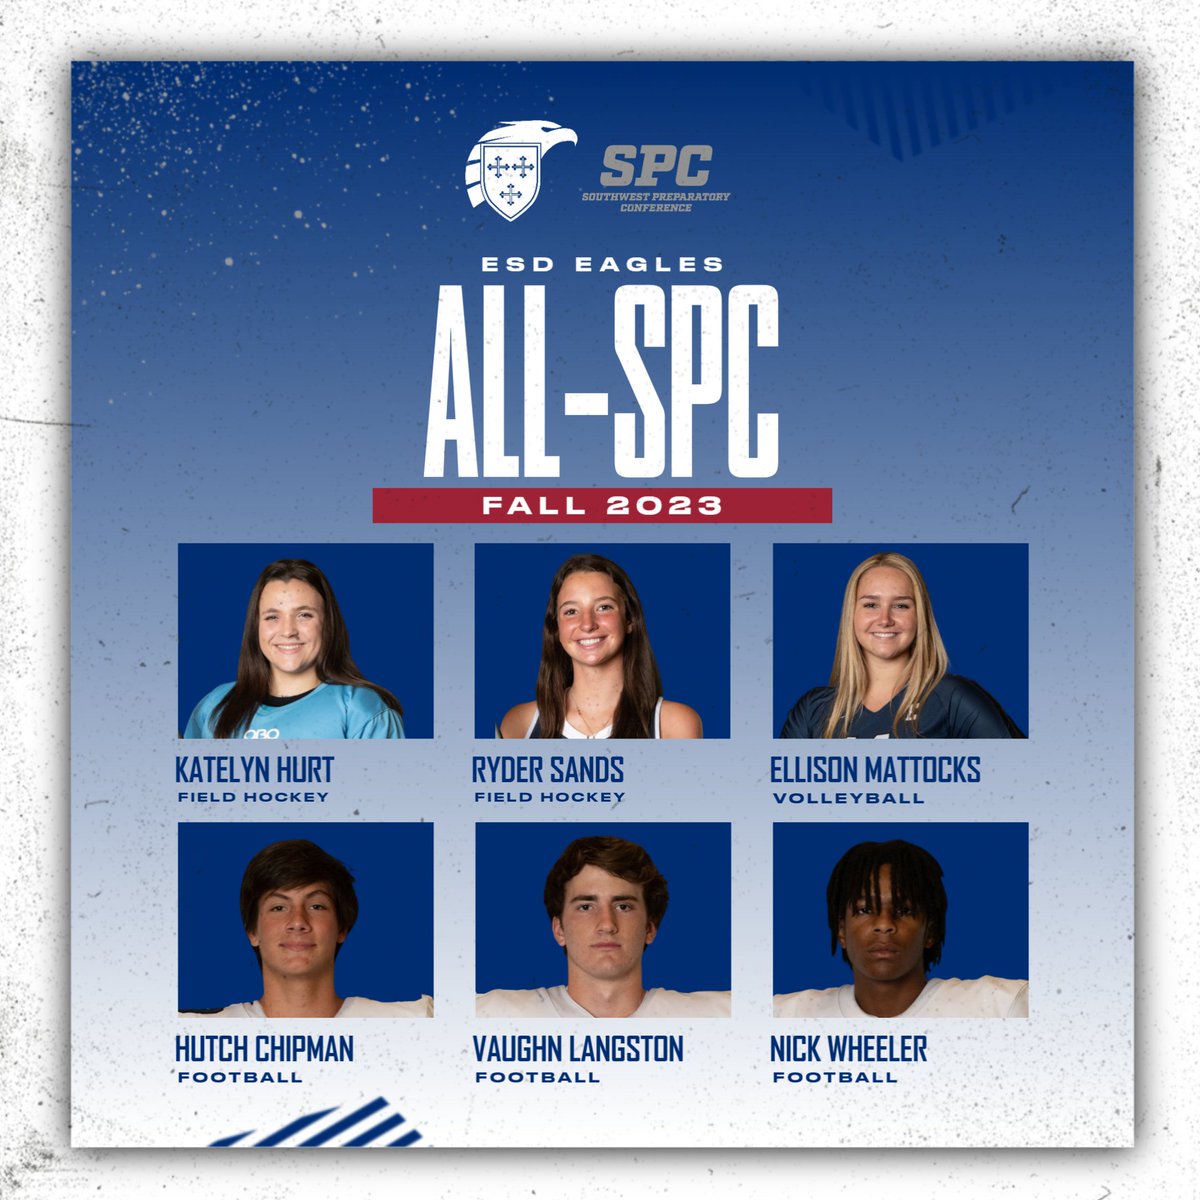 Hard work pays off! Congratulations to 6 of our fall student-athletes for being selected for All-SPC! @spcsports @ESDfieldhockey @ESDVB @ESDFootball_